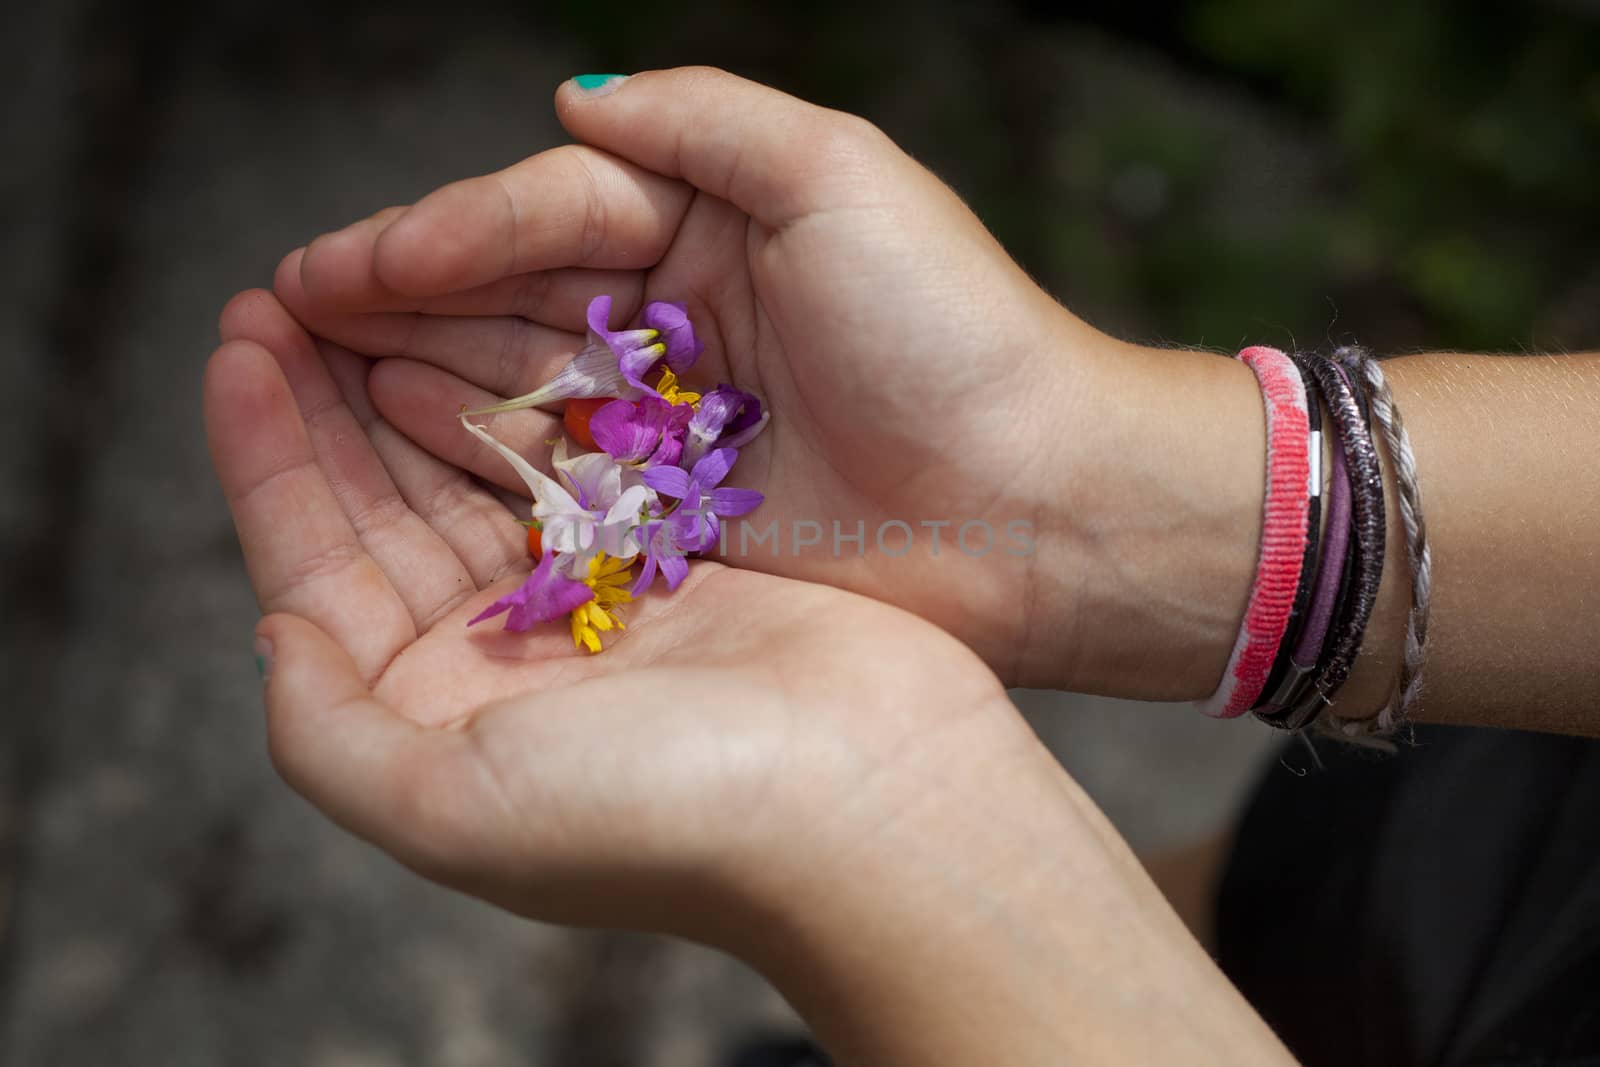 Girl's Hands Holding Wildflowers  by demachy